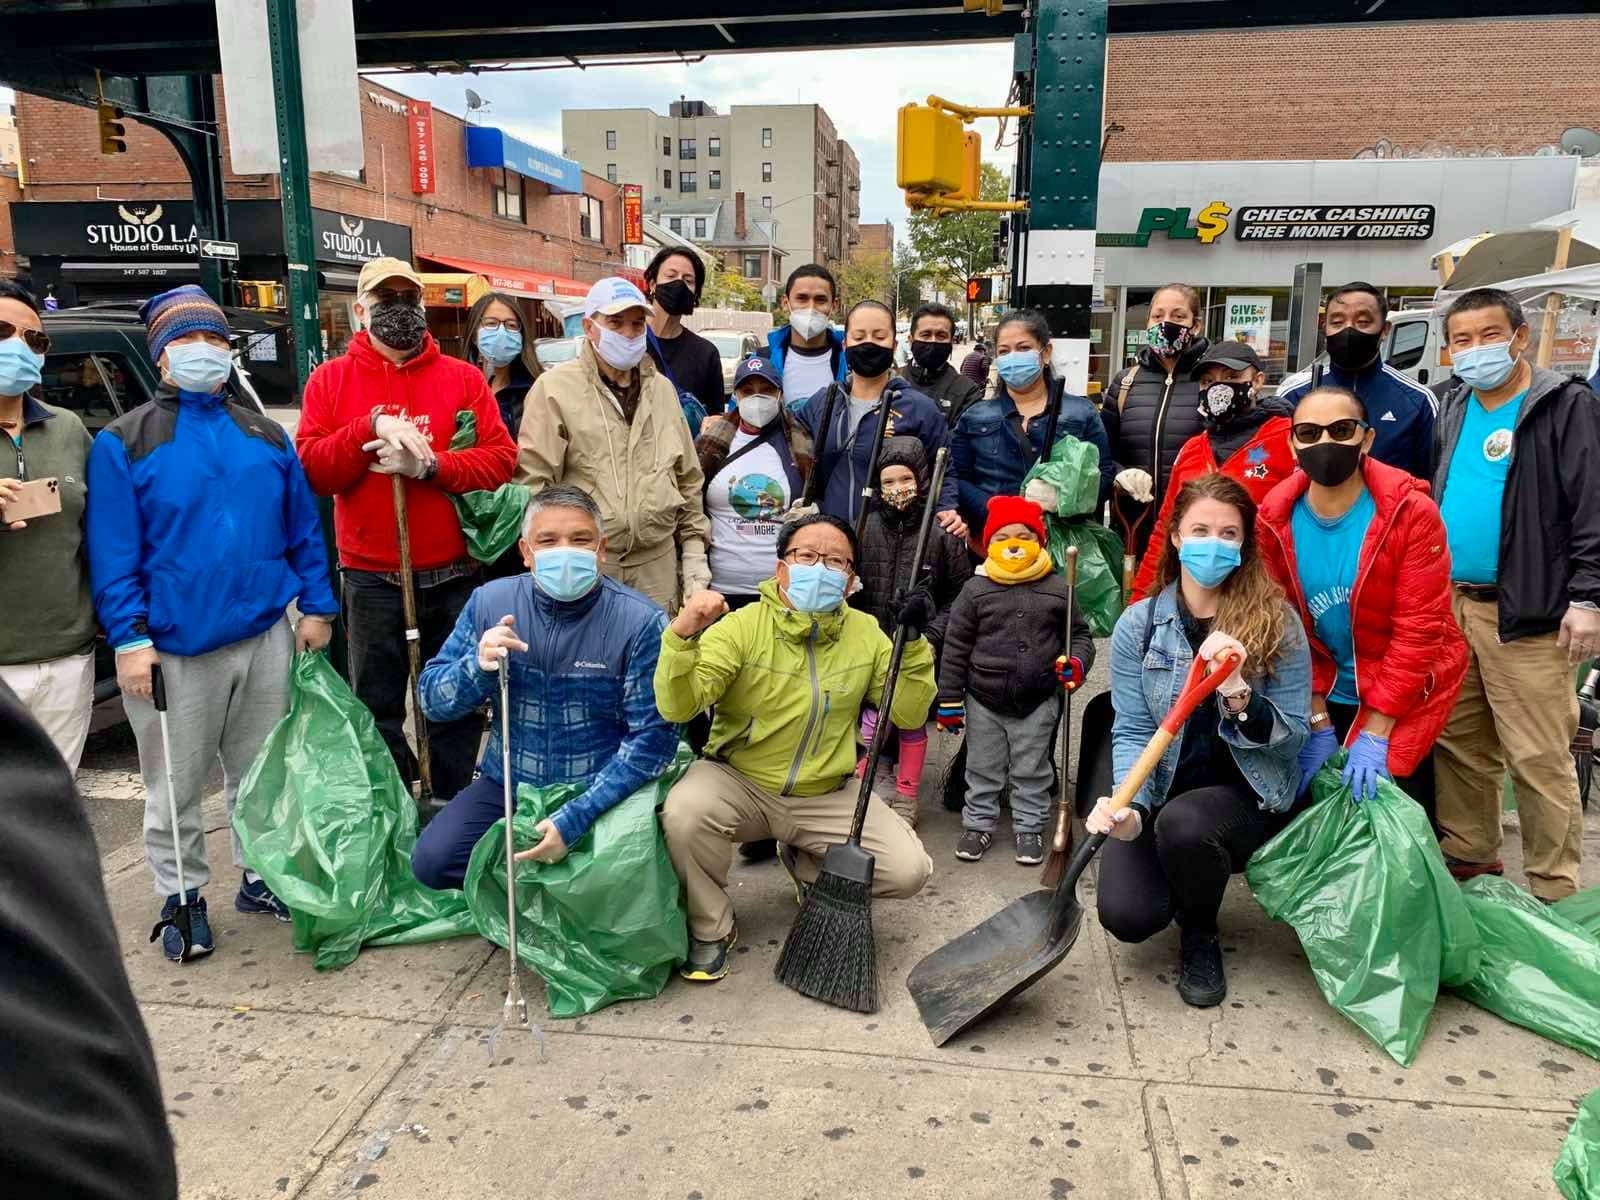 Photo shows about 20-22 people posing with shovels, rakes, and brooms and holding green trash bags. They are all wearing COVID masks and have coats on. There are men, women and young children included. 